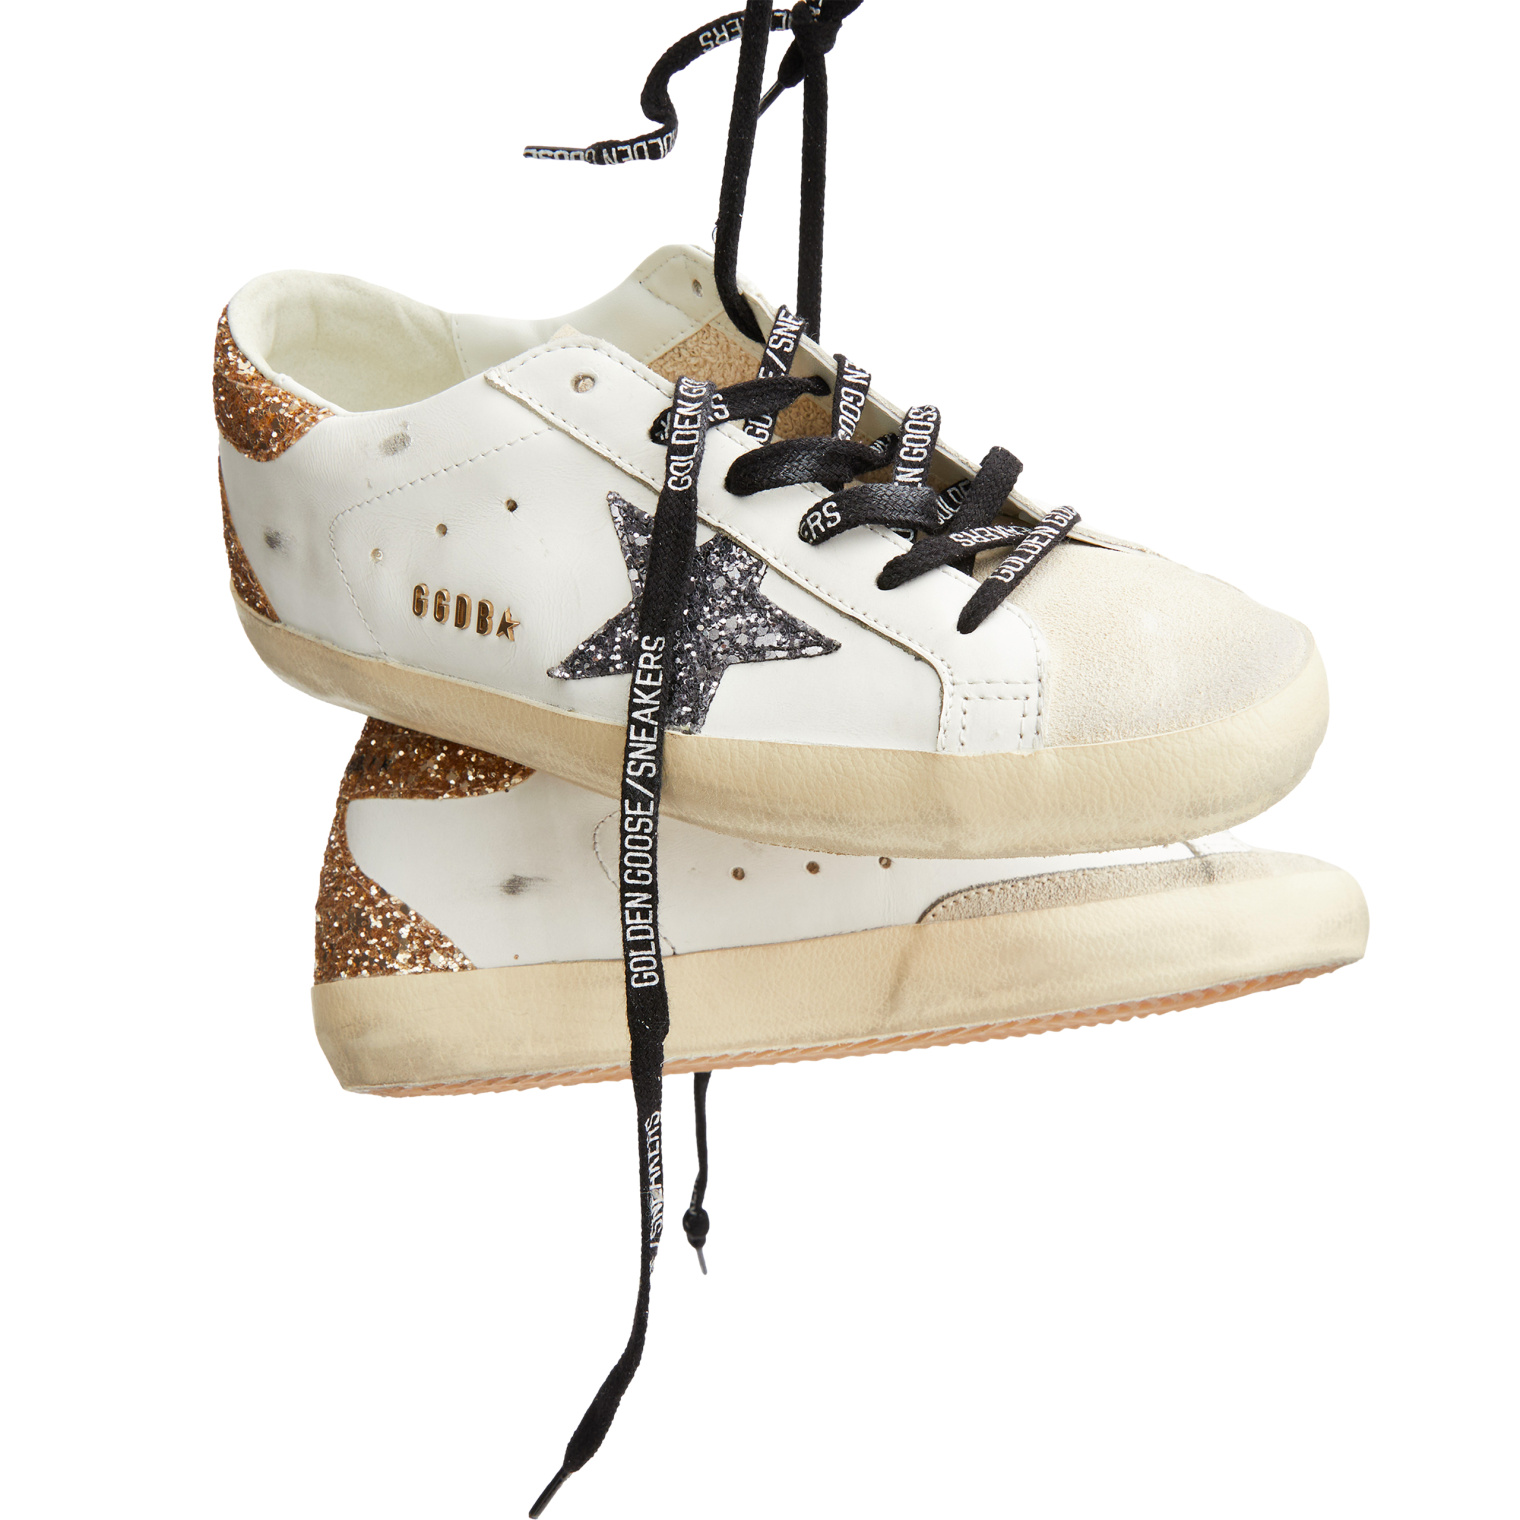 Golden Goose Super Star leather sneakers with glitter star